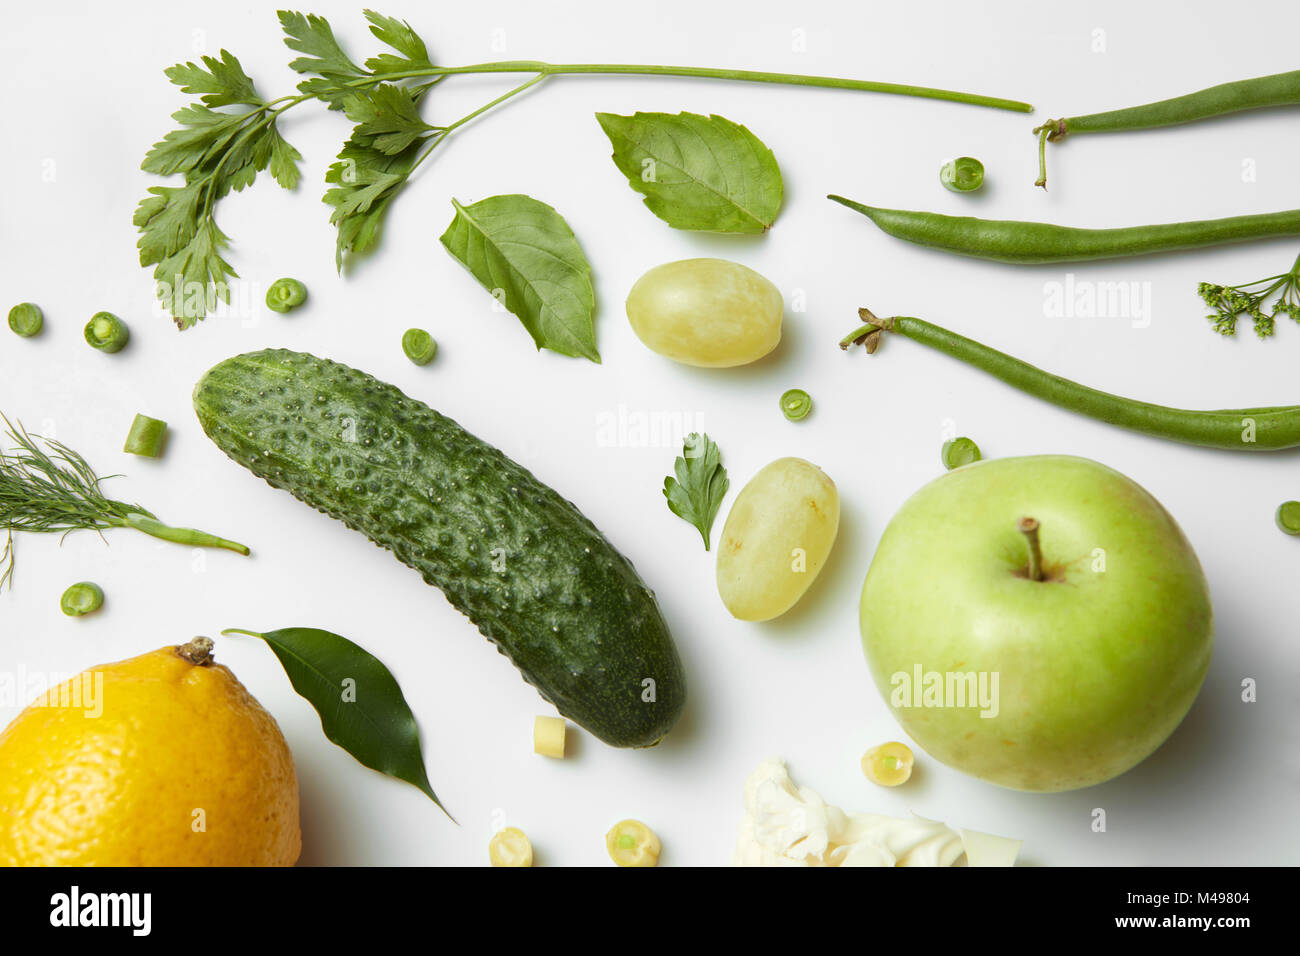 different fruits and vegetables isoleted on white Stock Photo